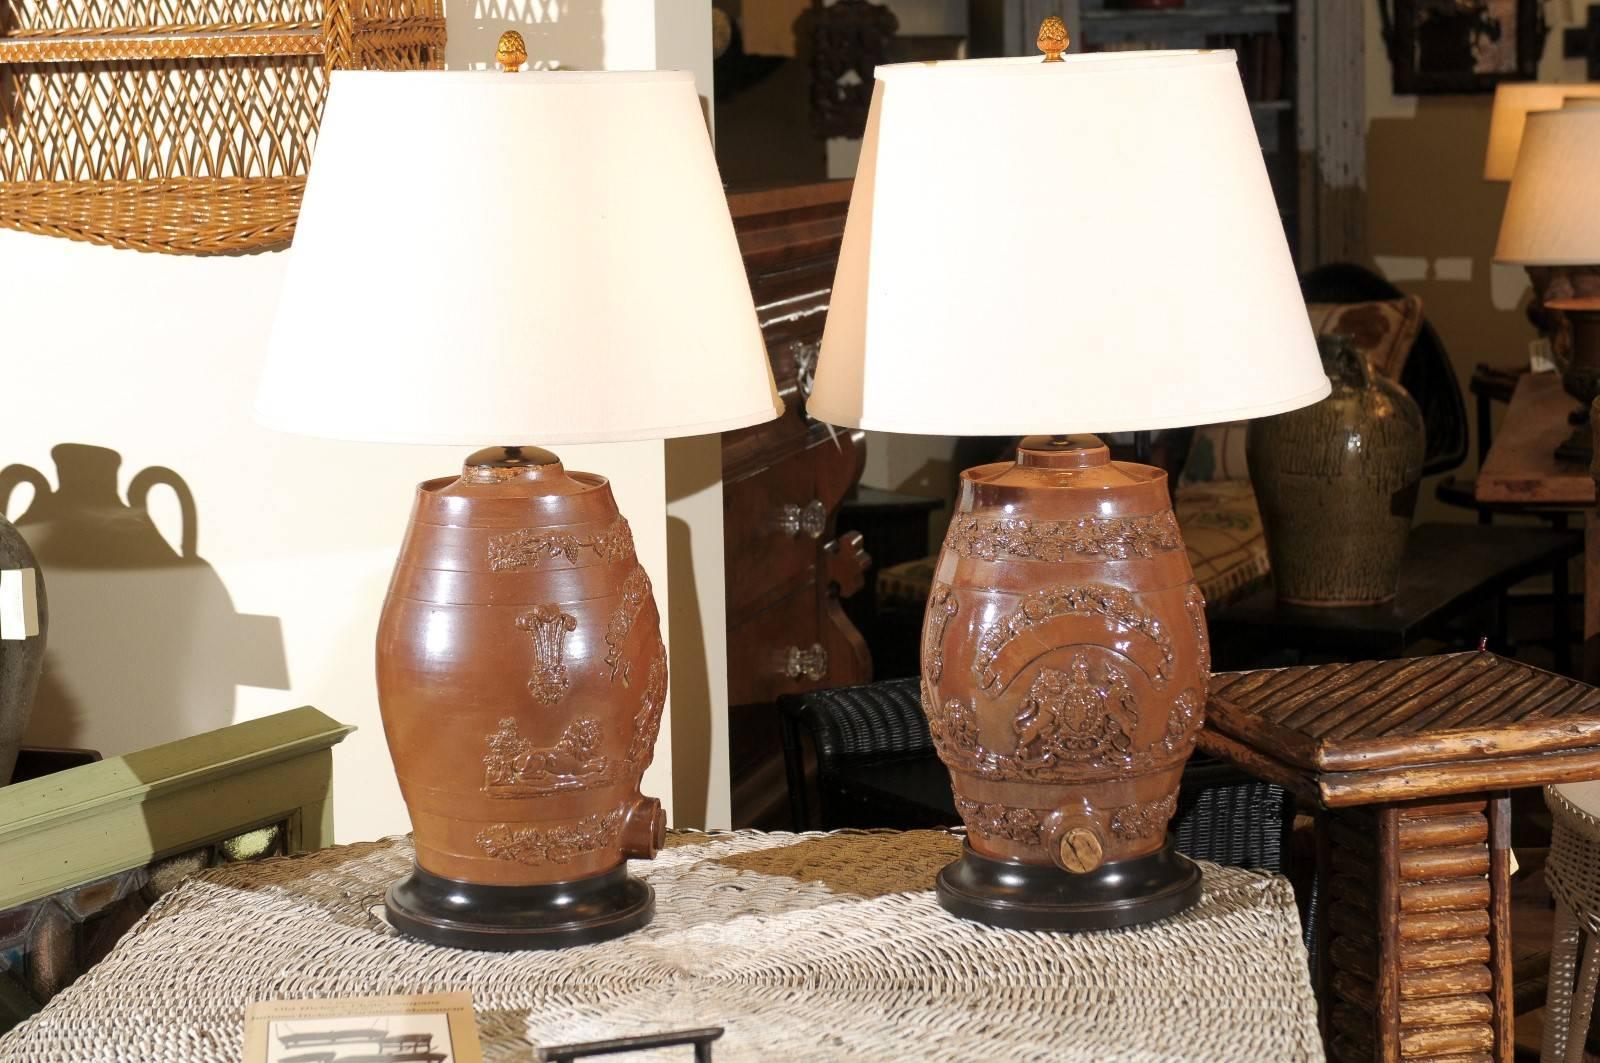 This pair of English salt glazed water filter lamps are a medium brown color. The main part of the lamps have the raised words "Dieuet Mondroit" which is the motto of the United Kingdom outside of Scotland, meaning "God is my